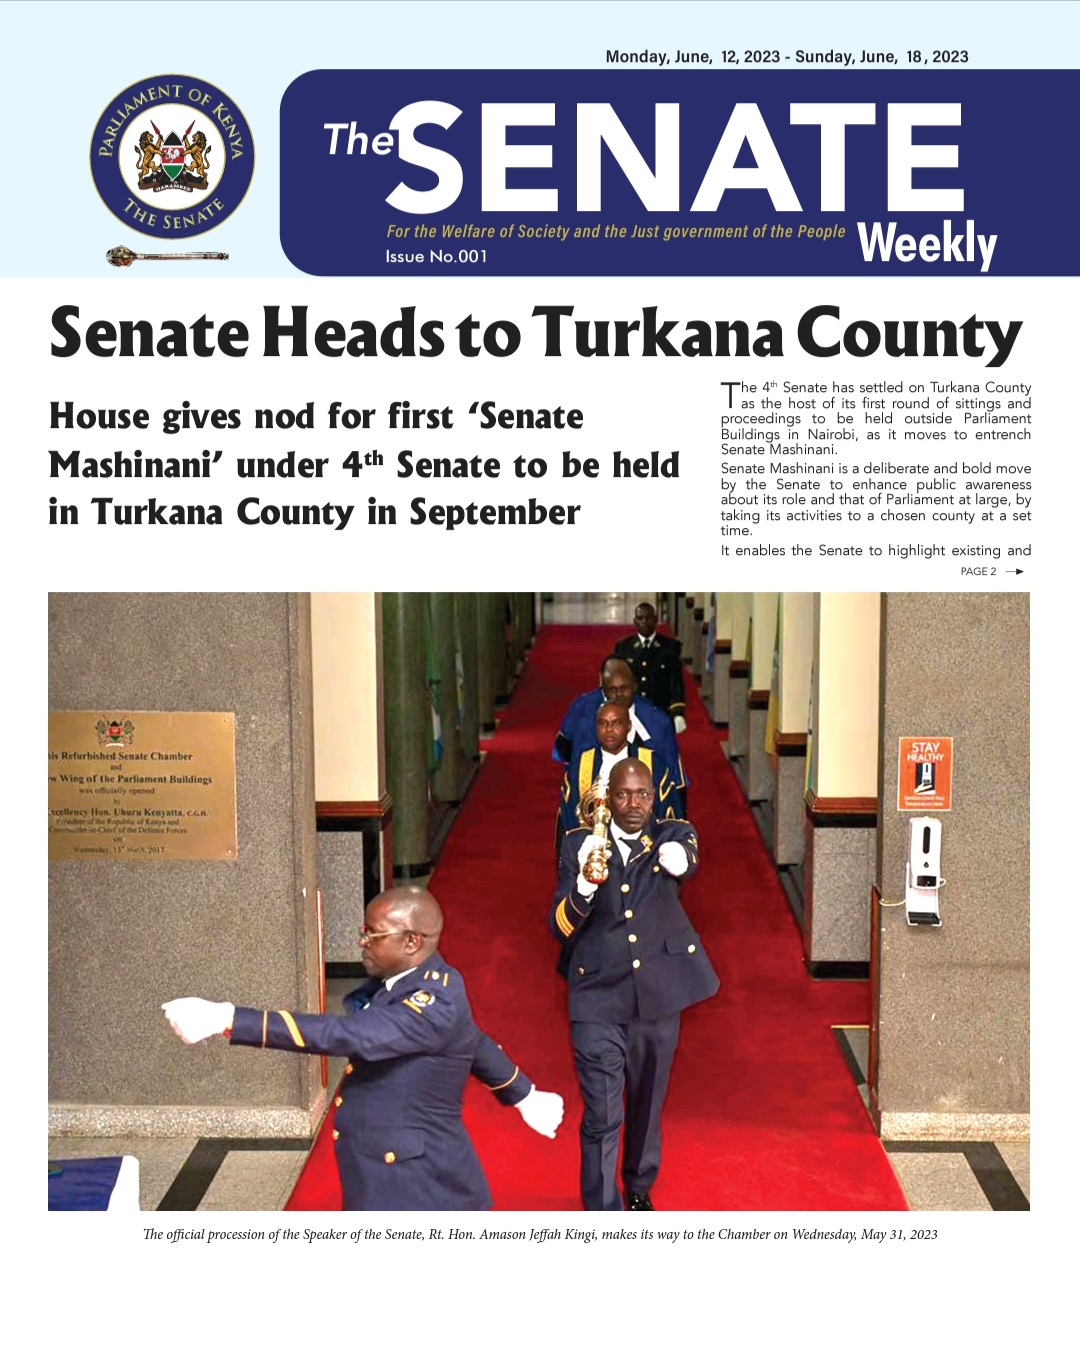 THE SENATE WEEKLY: Issue No.001